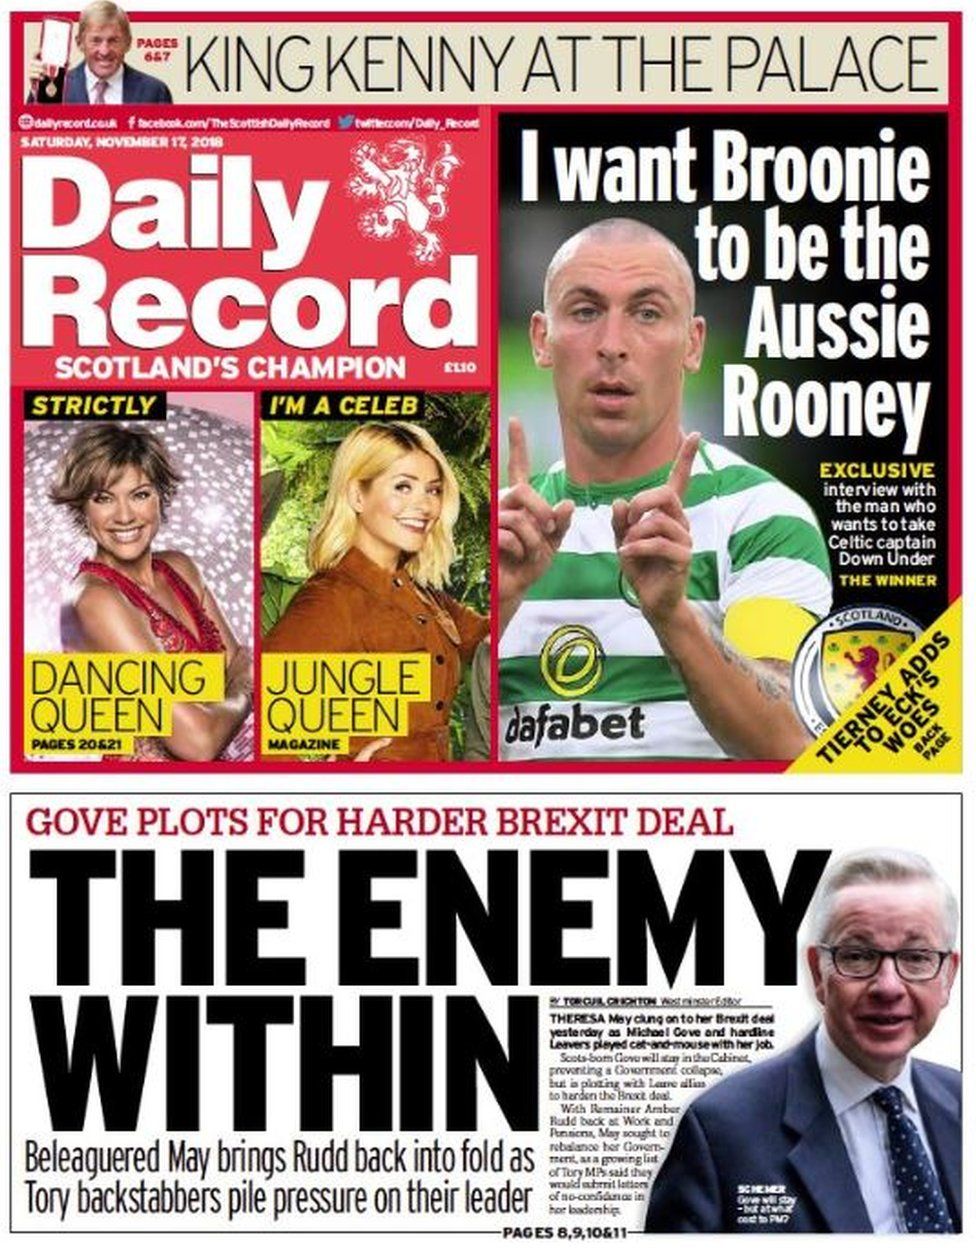 The Daily Record